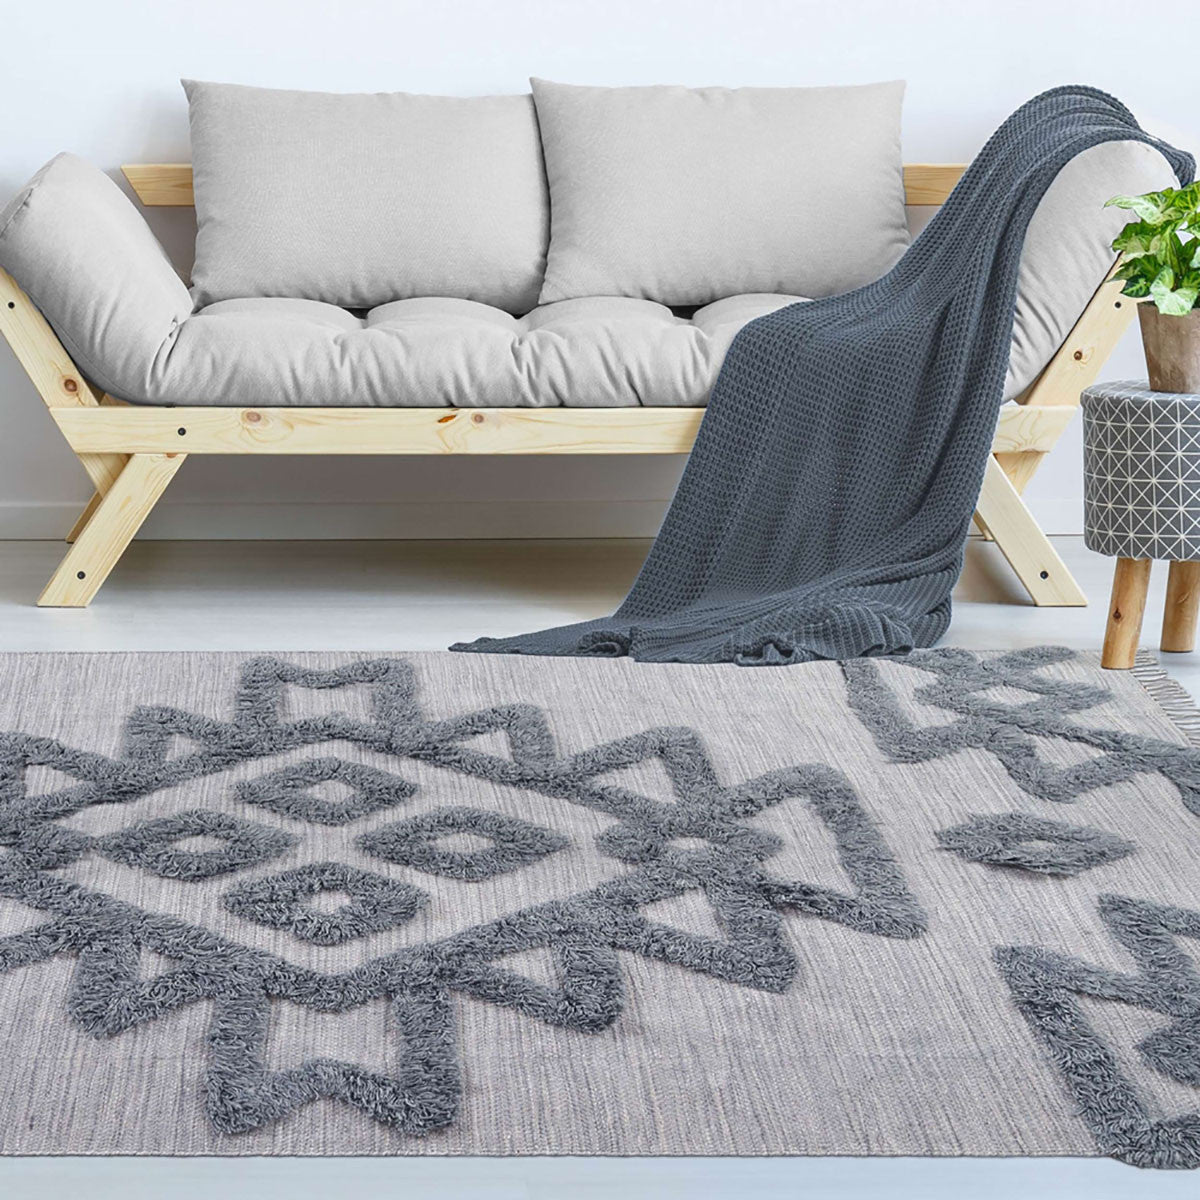 4' X 6' Silver And Grey Wool Geometric Flatweave Handmade Stain Resistant Area Rug With Fringe